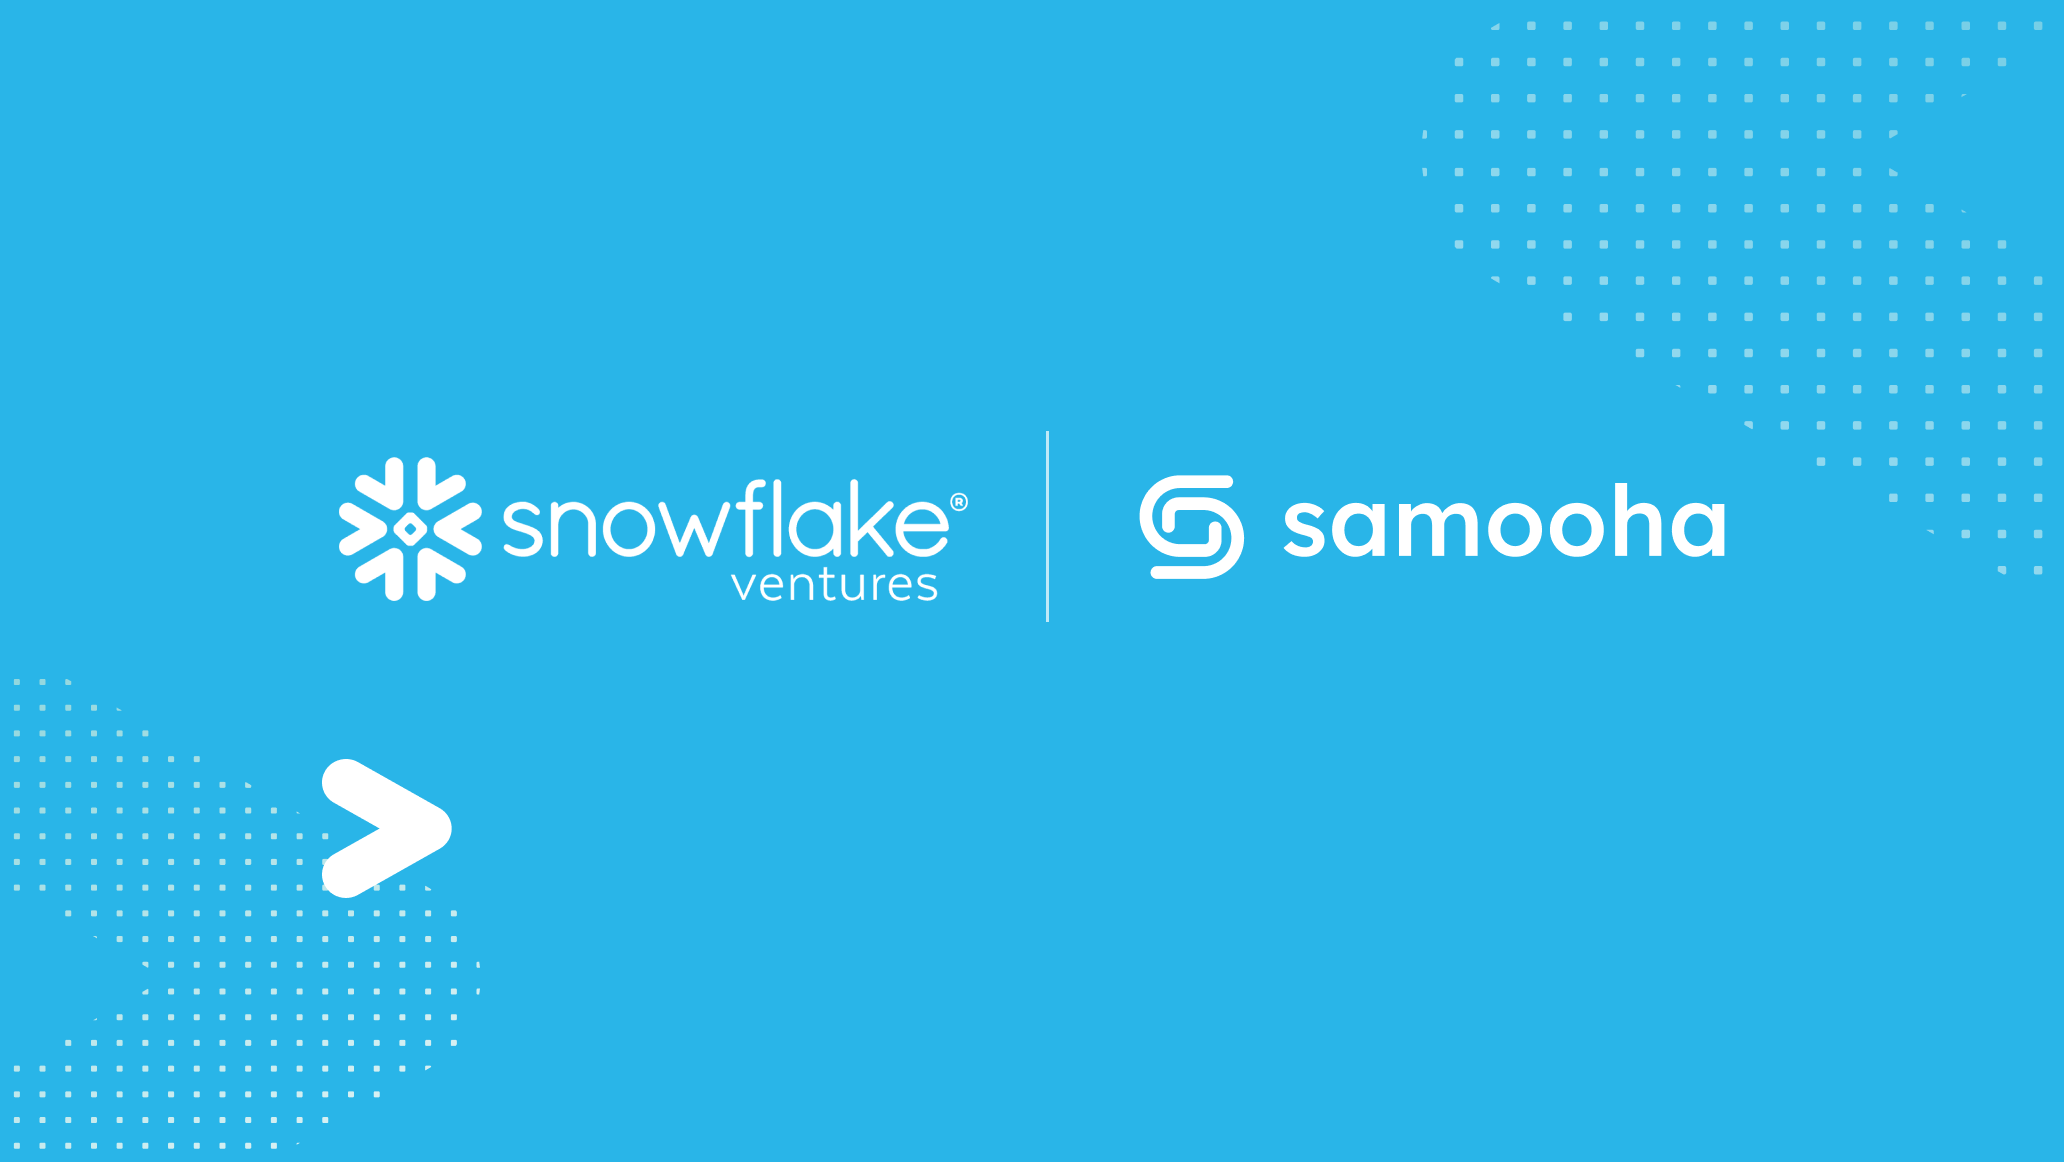 Snowflake Invests in Samooha, Bringing the Power of Data Clean Rooms to More Enterprises